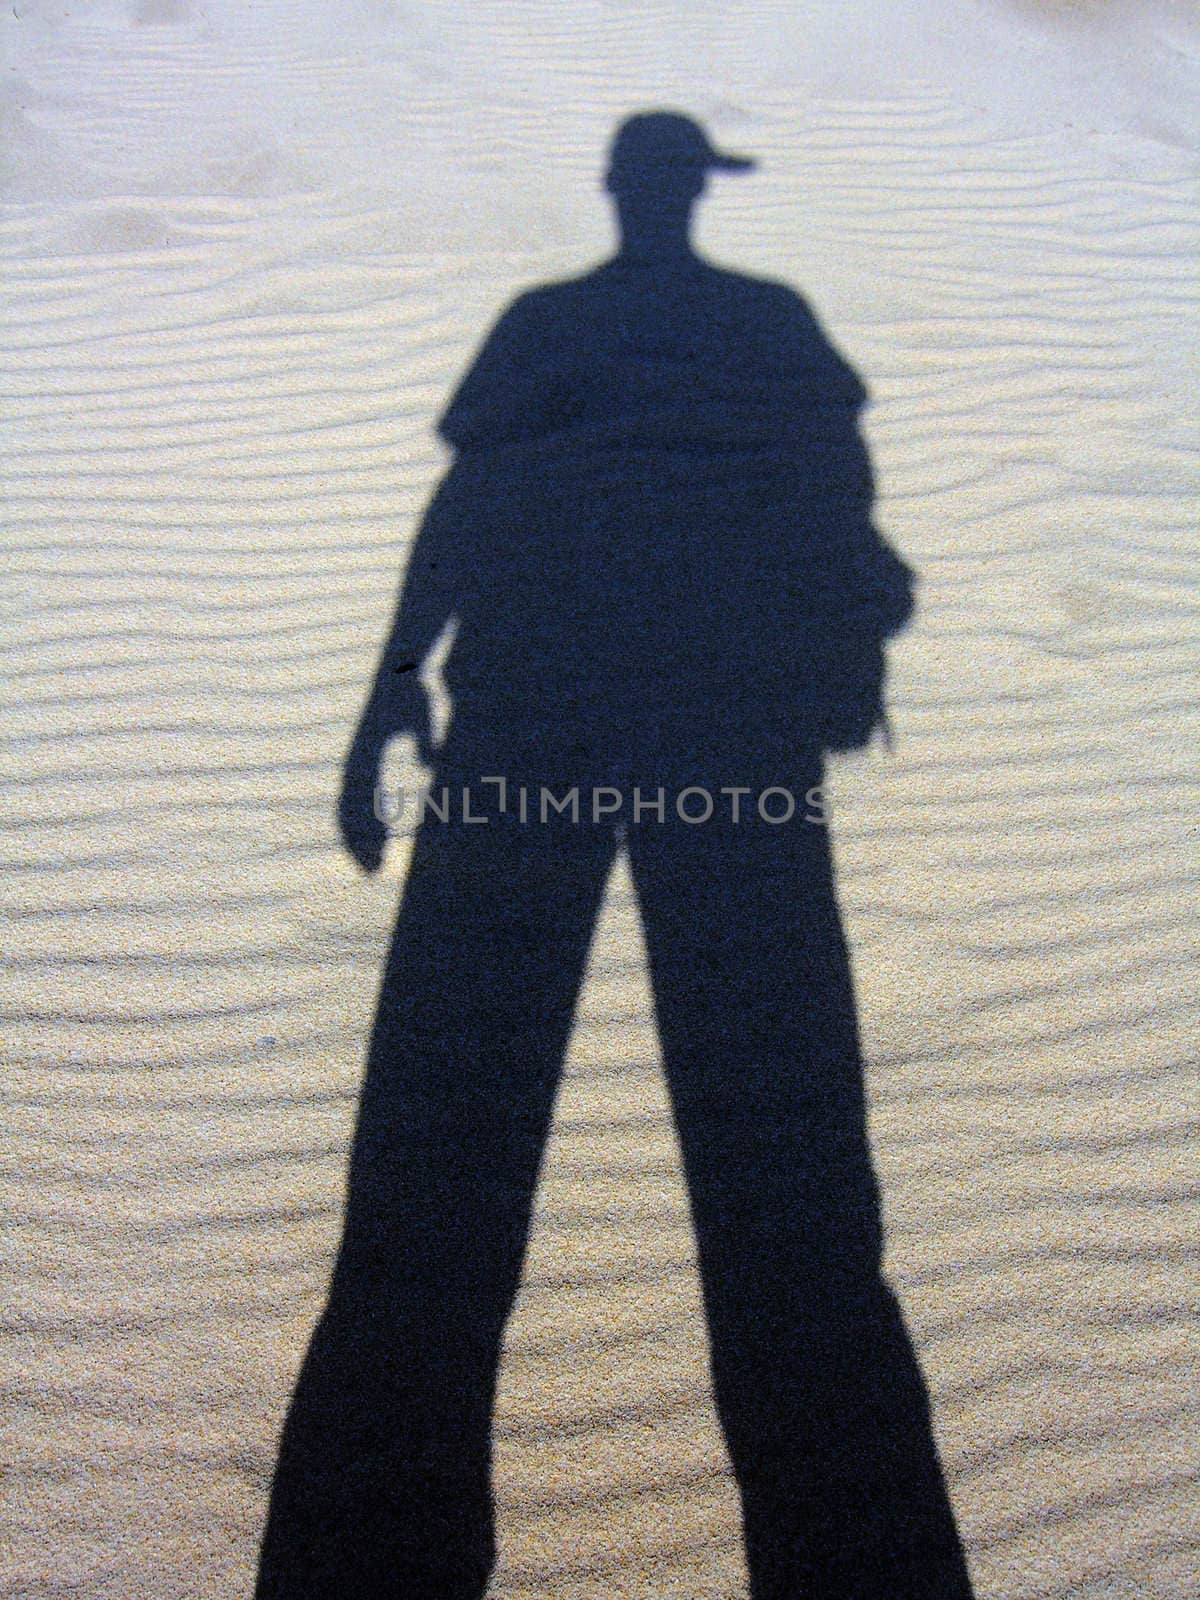 Shadow of a man reflected on the sand.